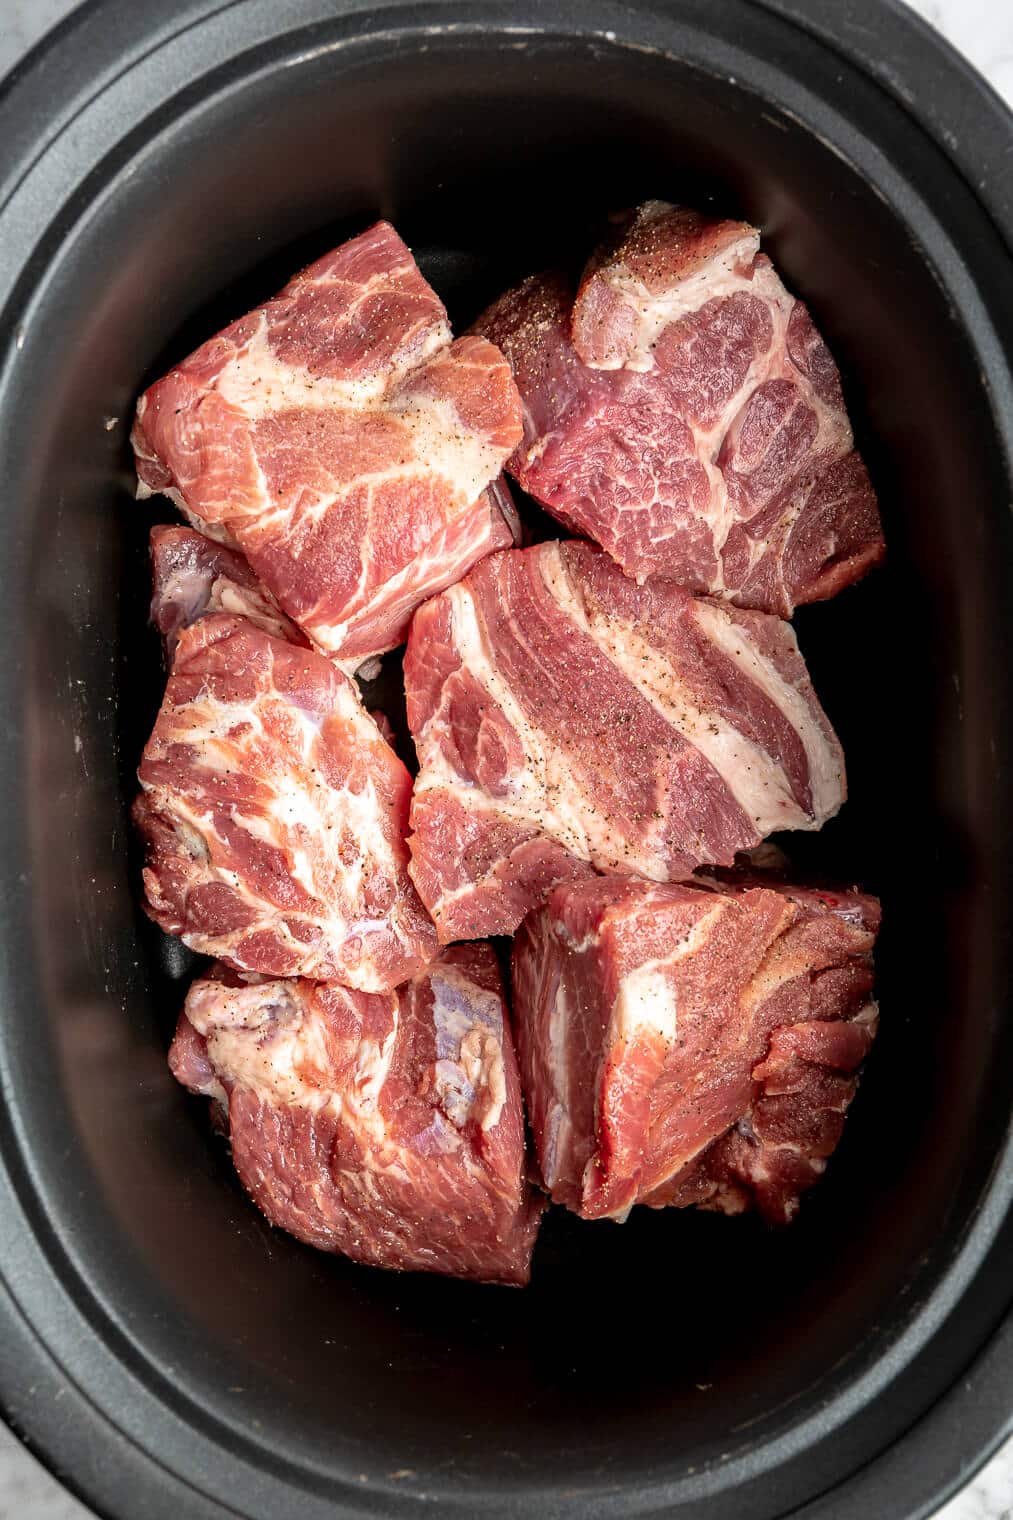 A large crock pot filled with chunks of raw pork butt.